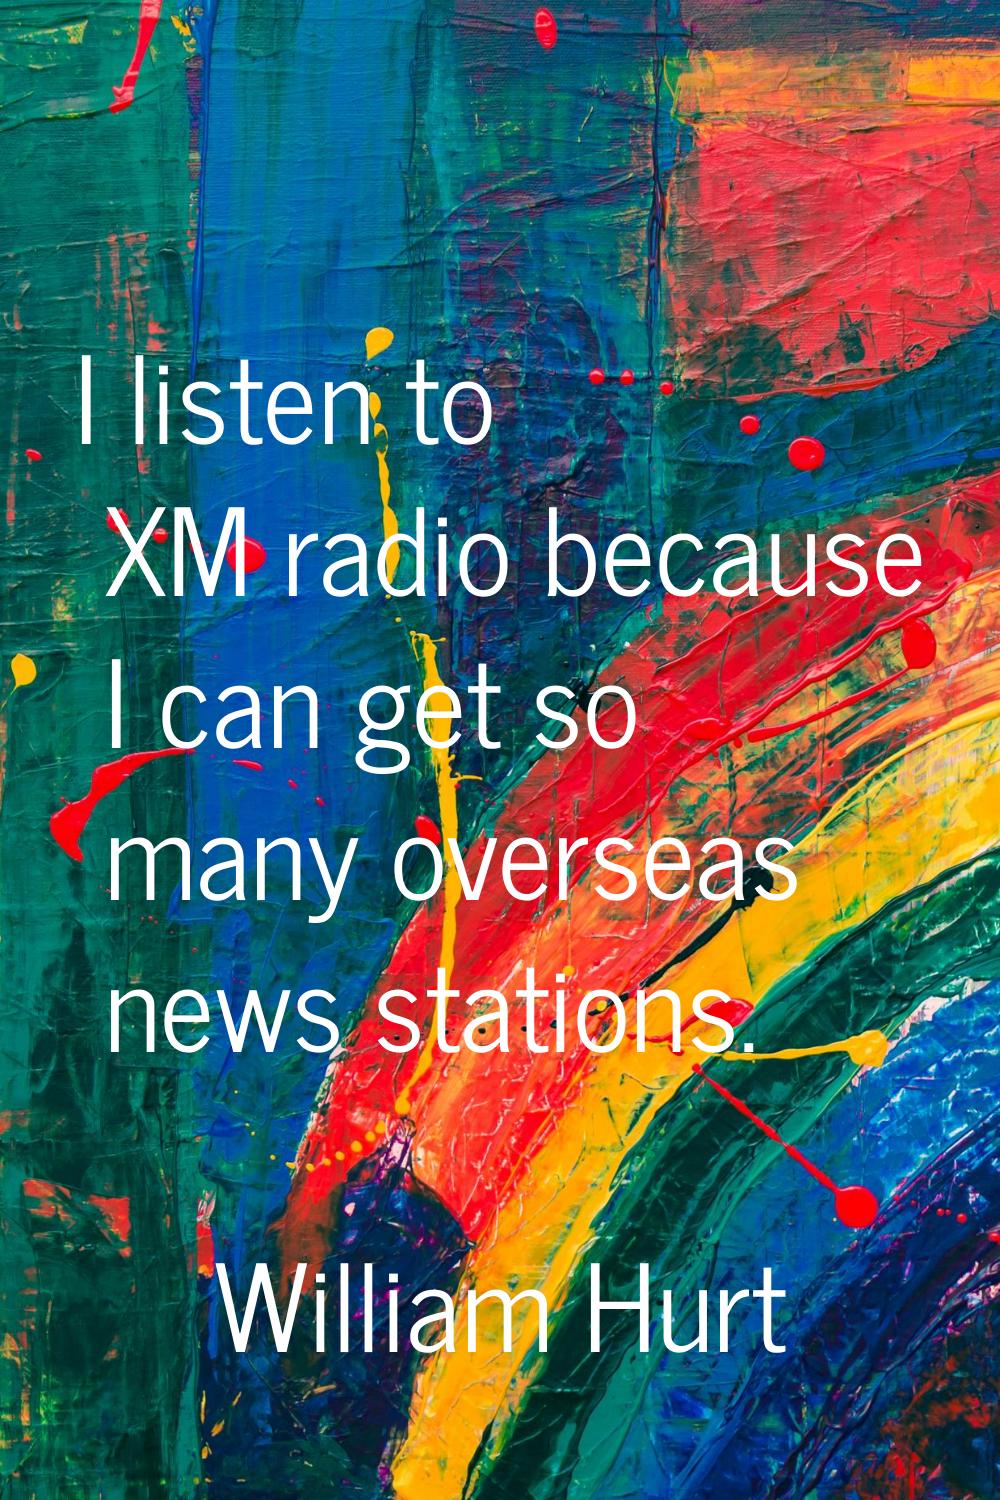 I listen to XM radio because I can get so many overseas news stations.